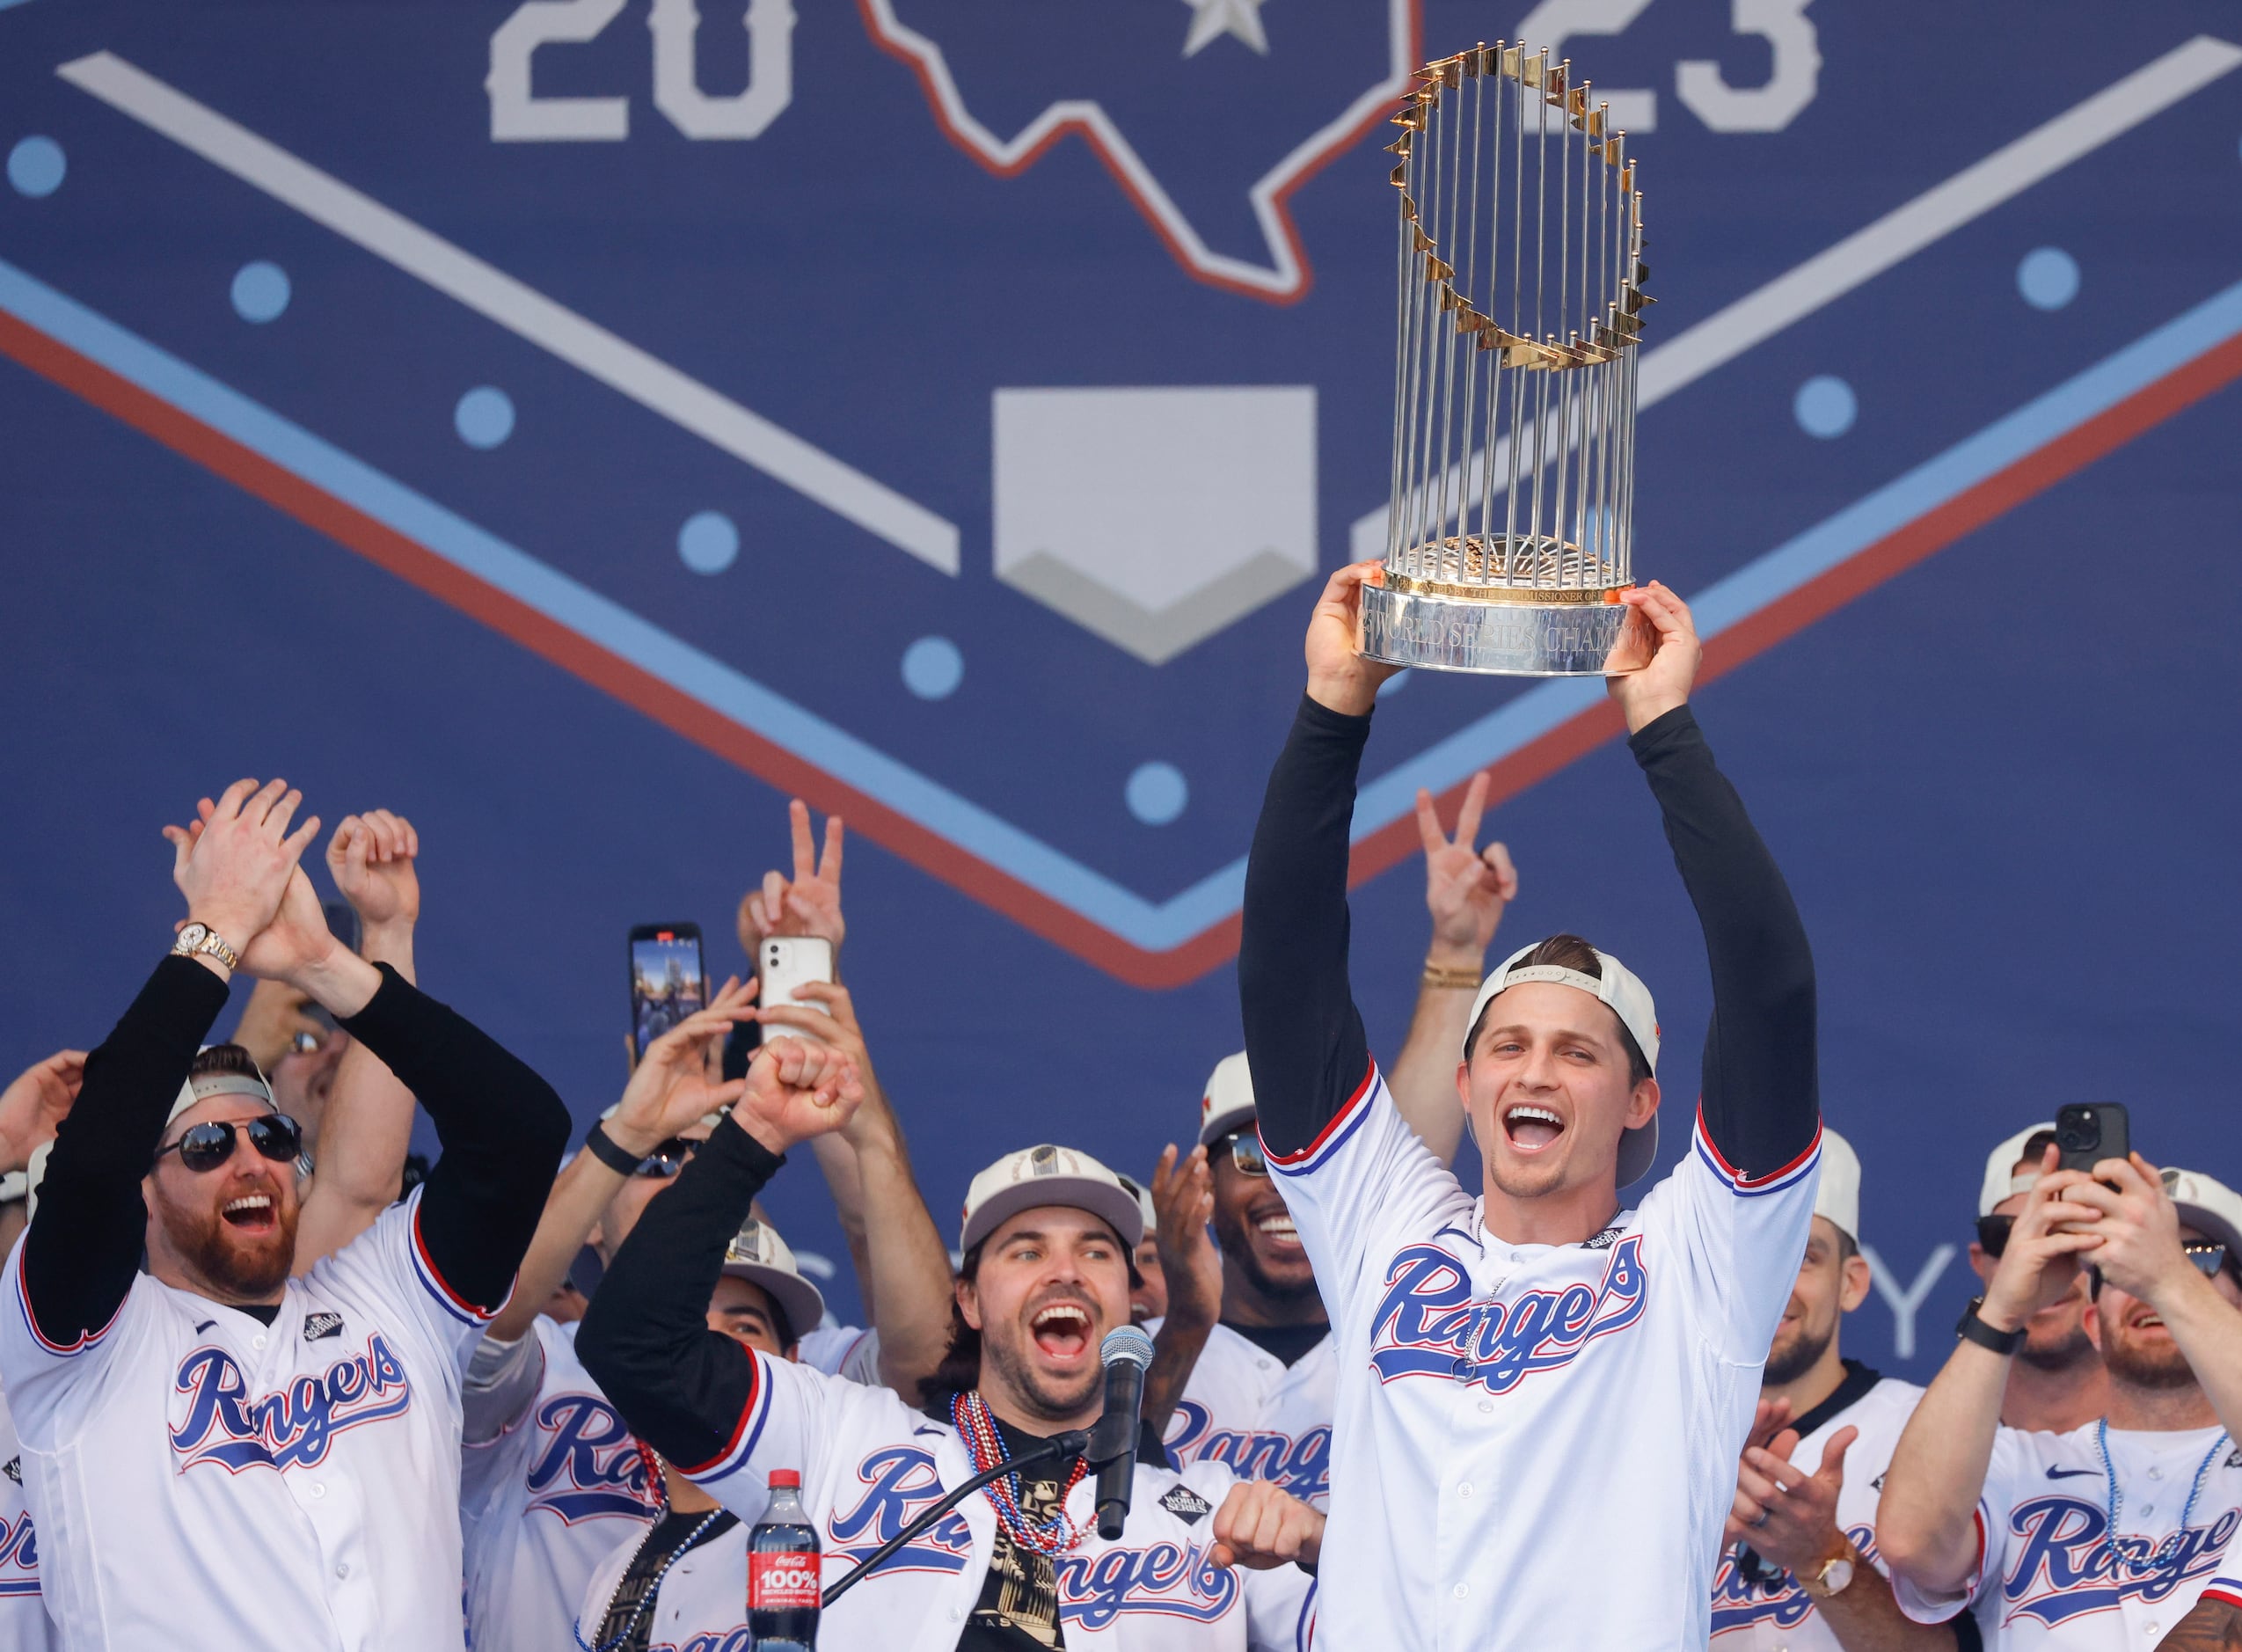 Raise it up: The best photos from the Rangers' World Series victory parade